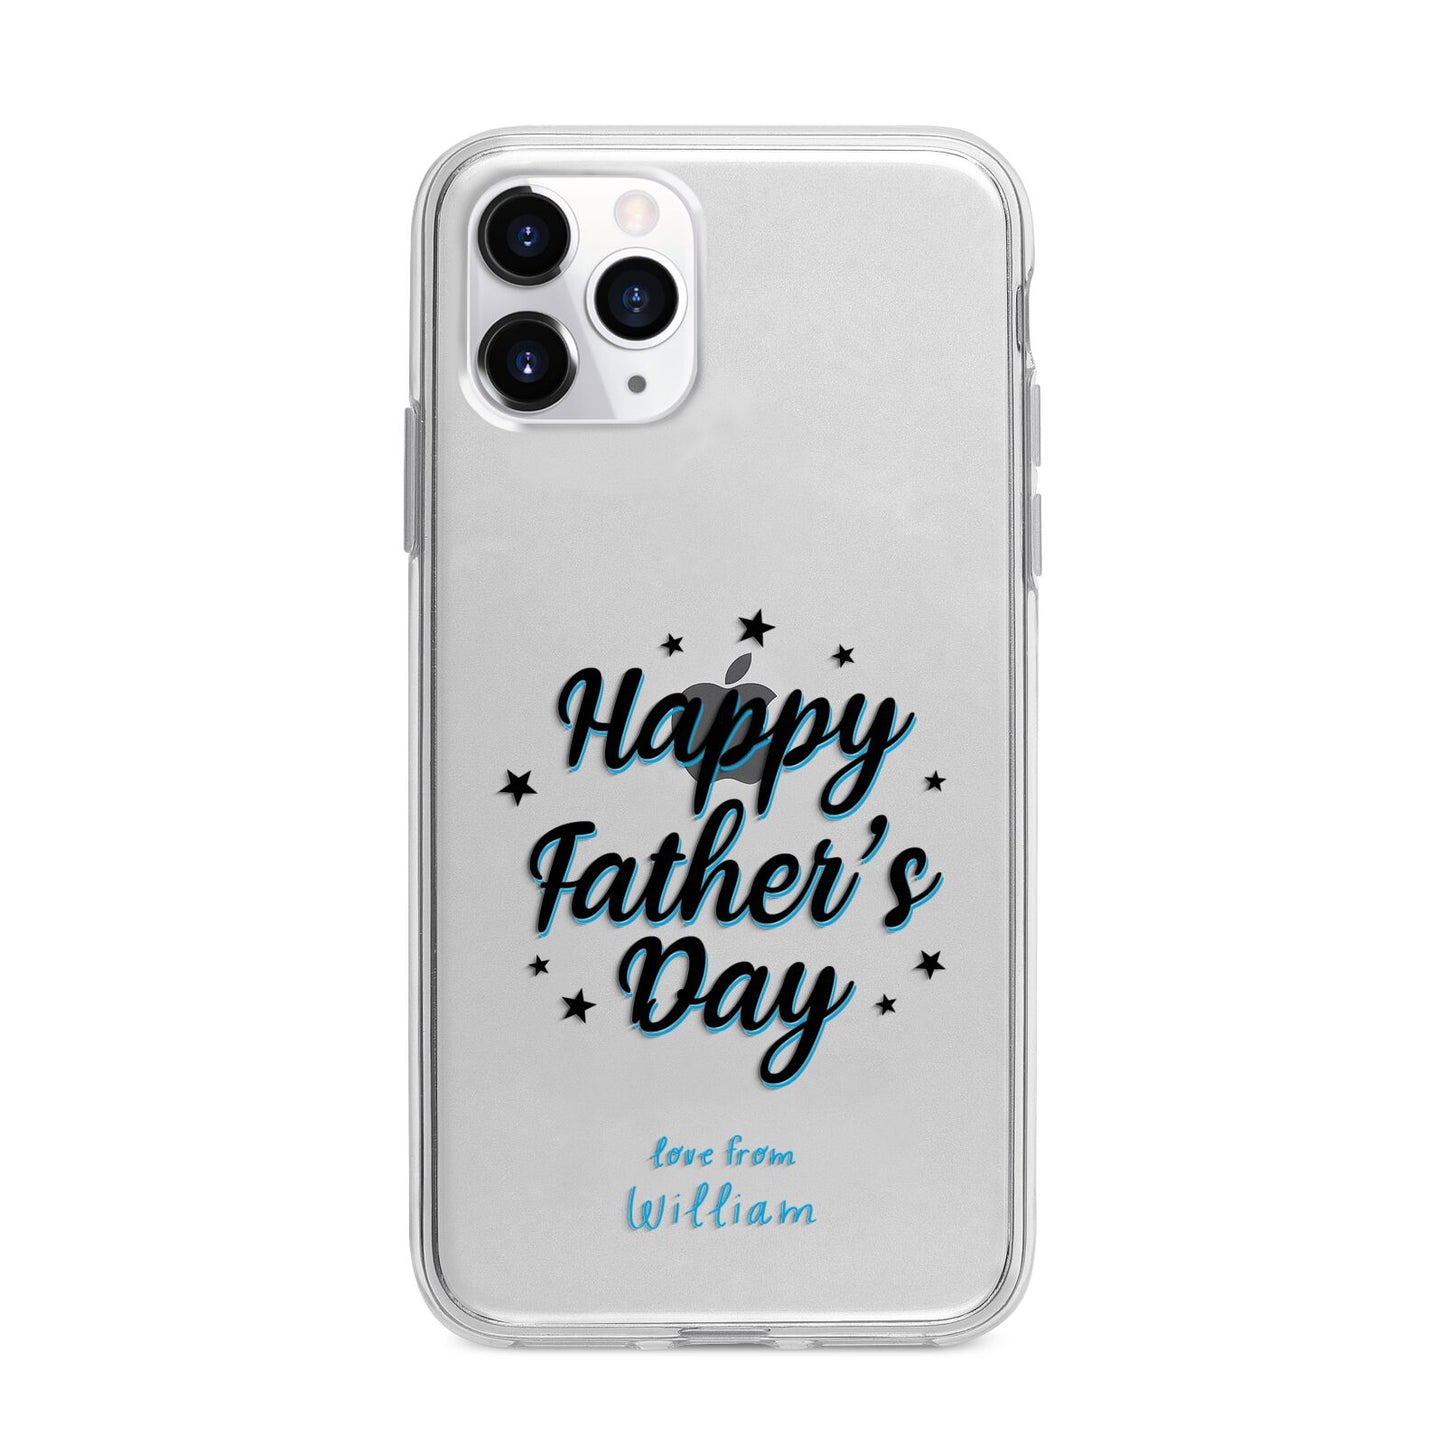 Fathers Day Apple iPhone 11 Pro Max in Silver with Bumper Case